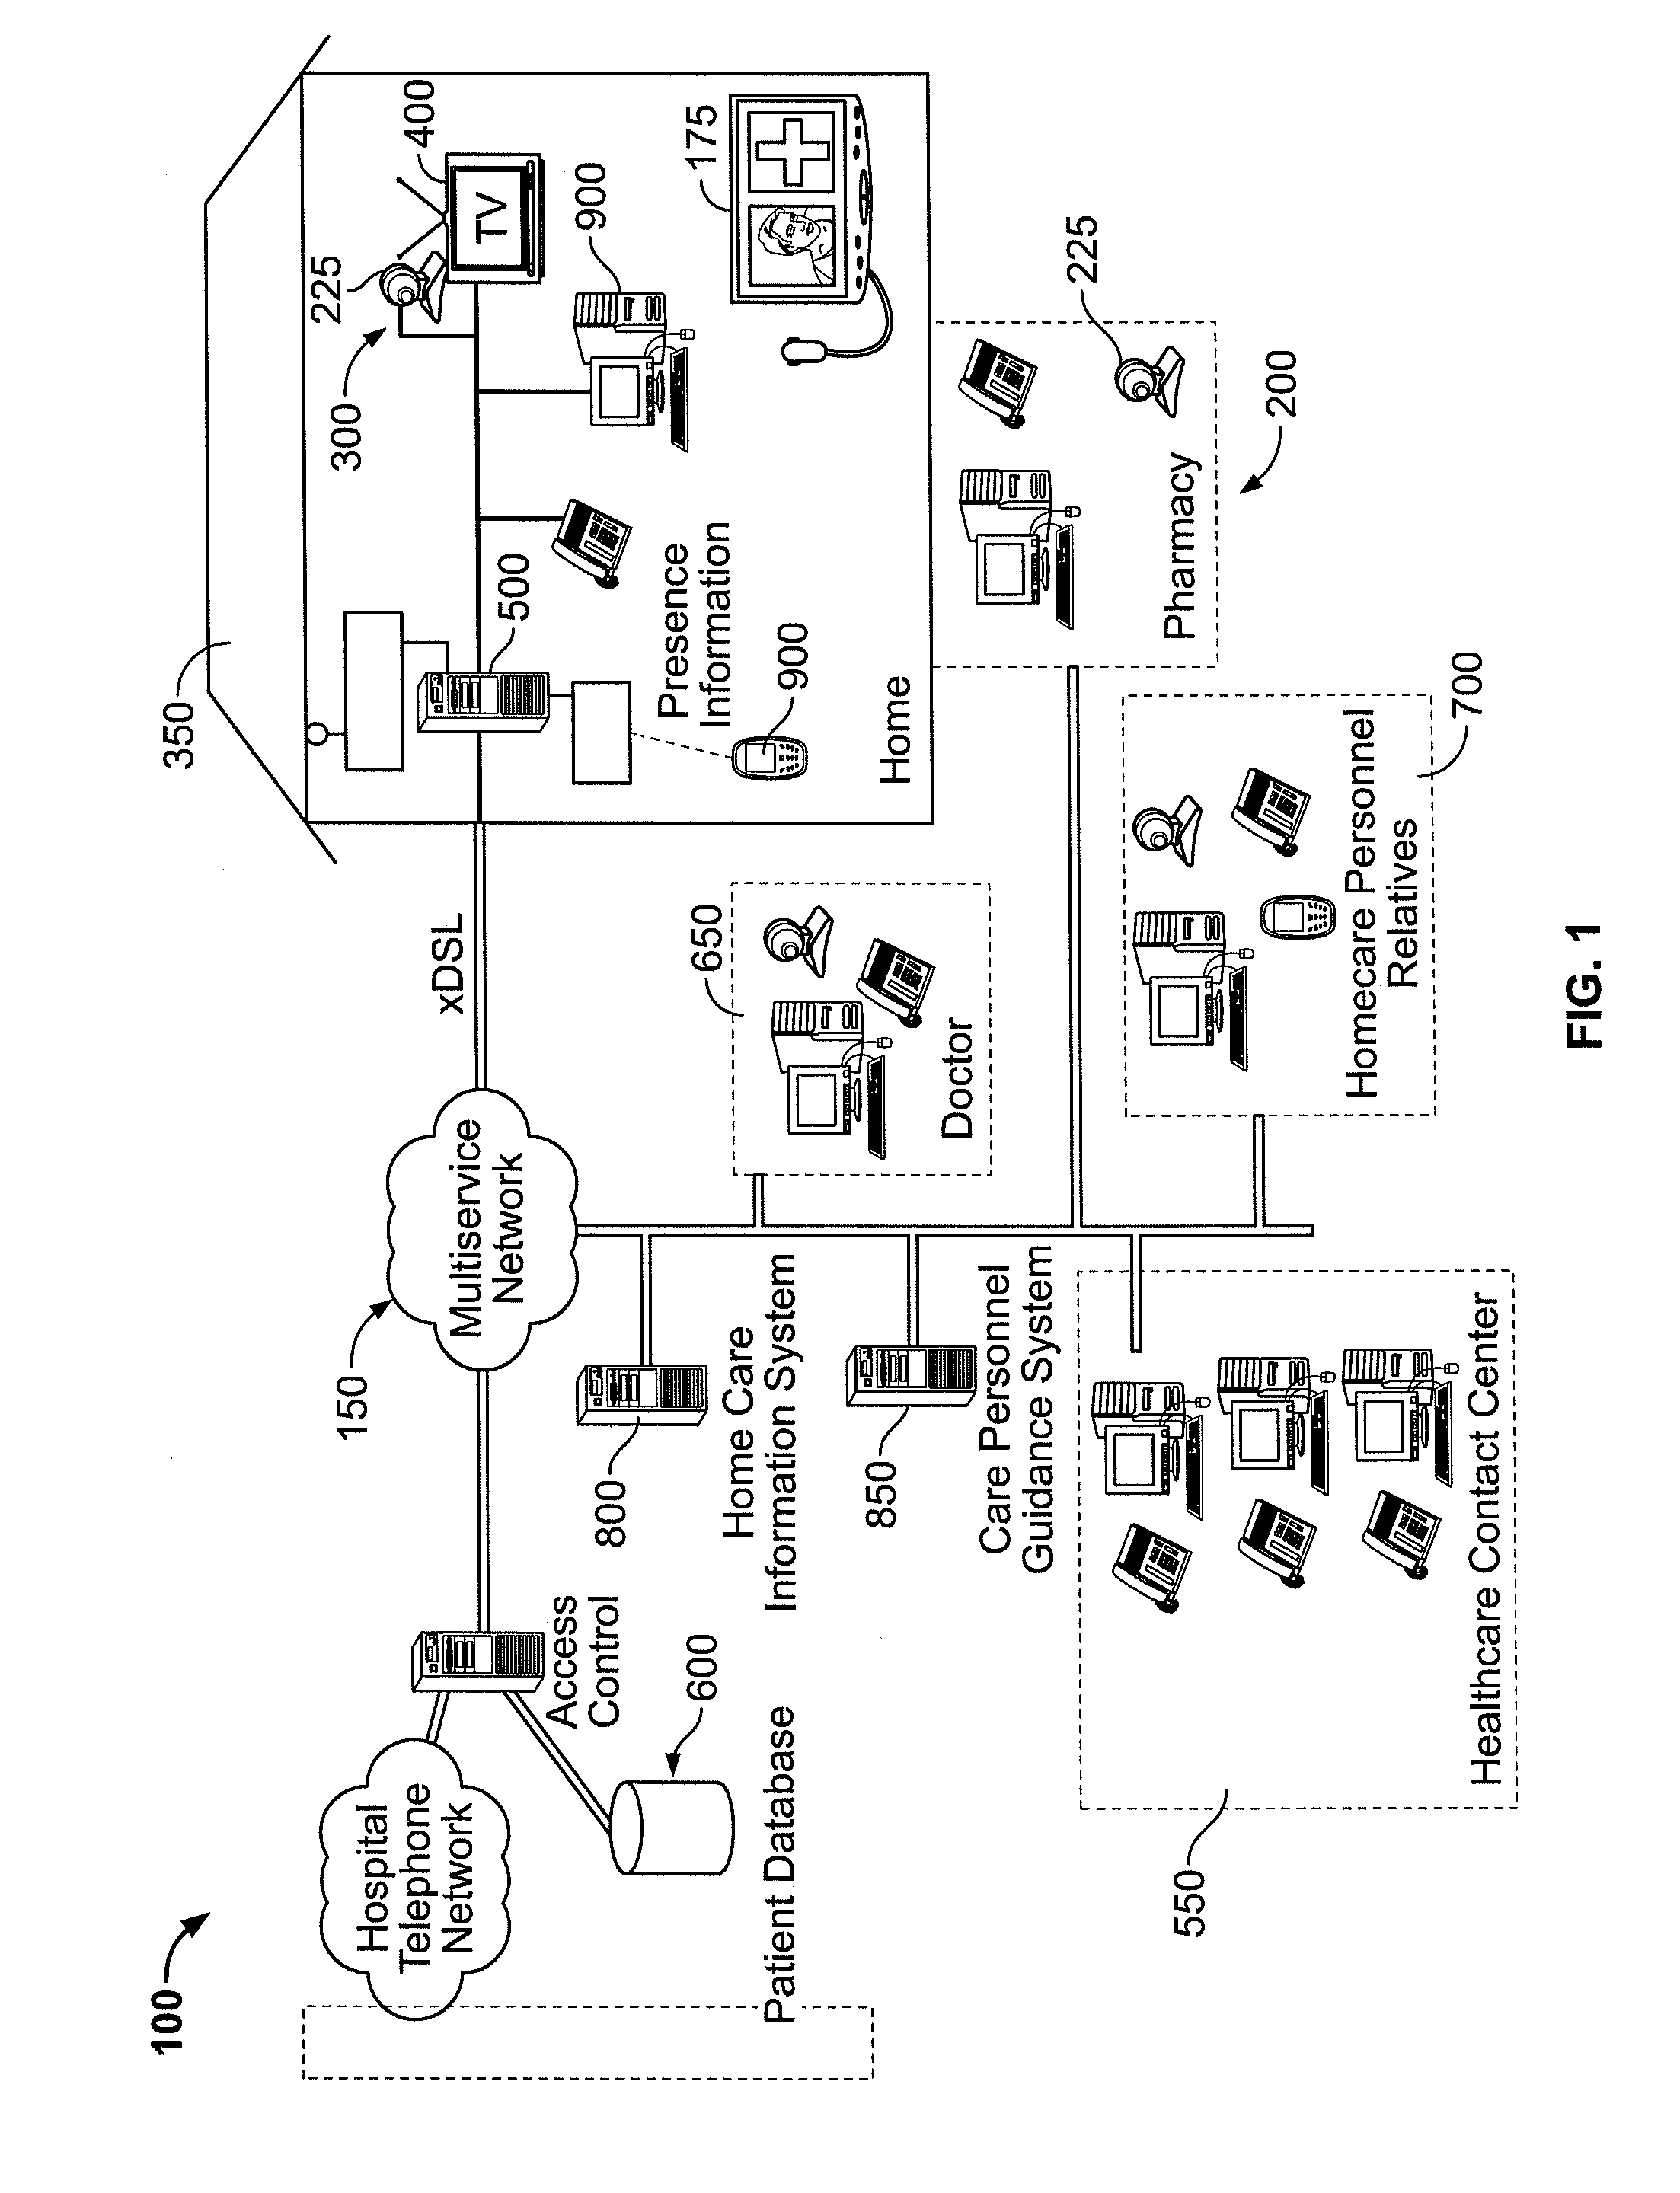 System and Method for Providing Health Care Services